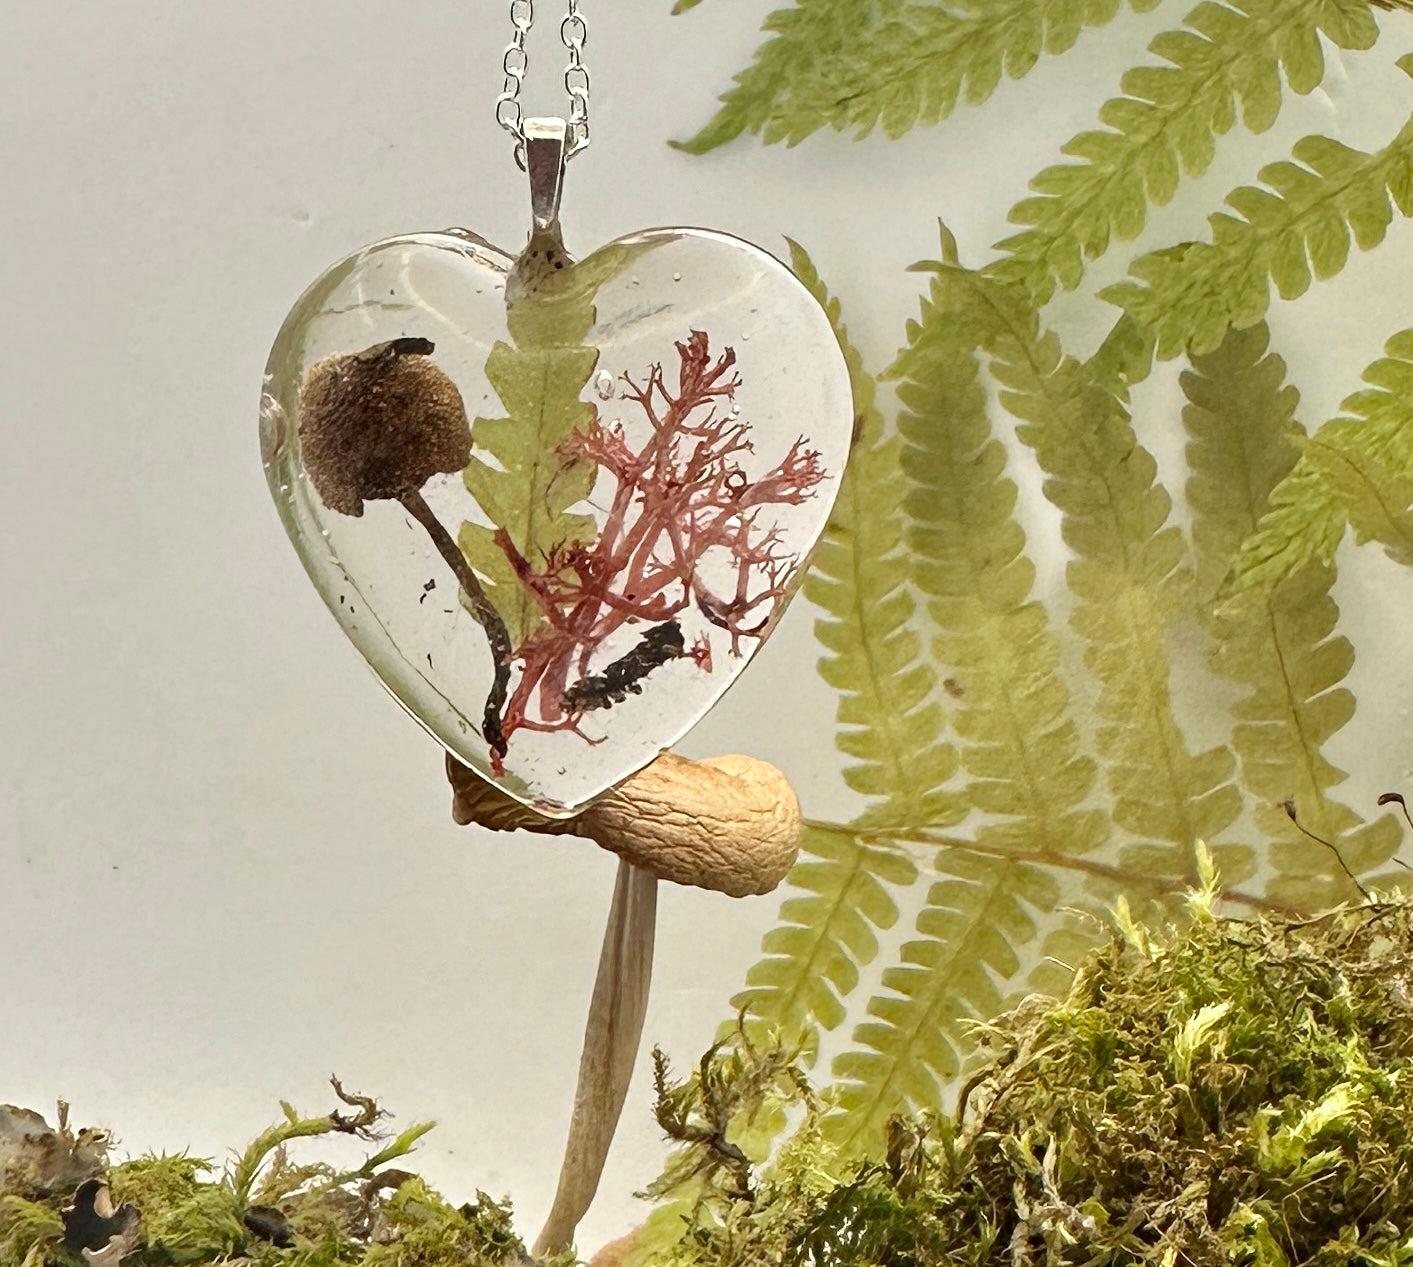 Heart for Nature Jewellery  - Forest Floor Necklace for Nature Lovers